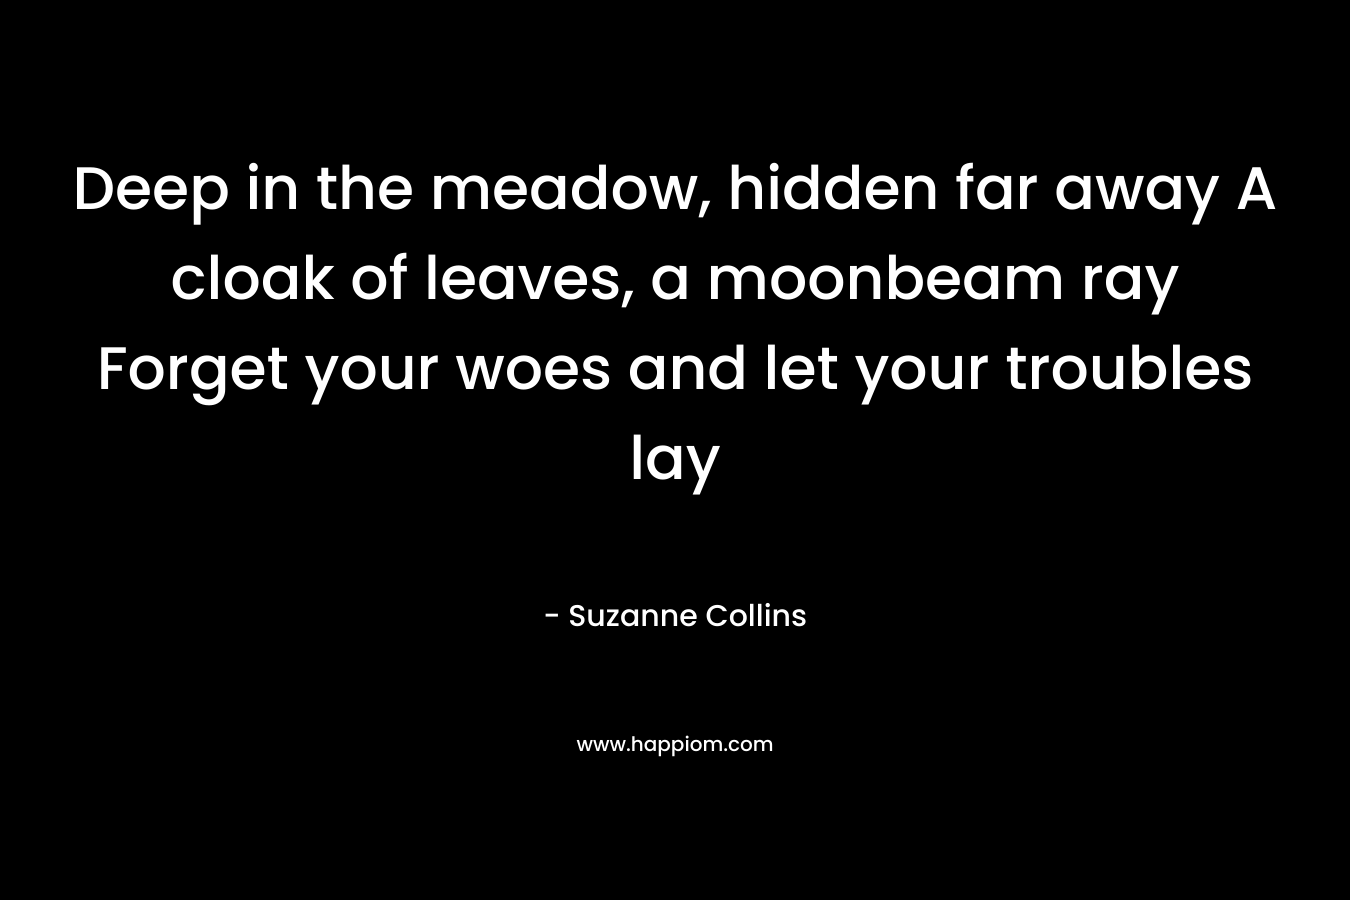 Deep in the meadow, hidden far away A cloak of leaves, a moonbeam ray Forget your woes and let your troubles lay – Suzanne Collins